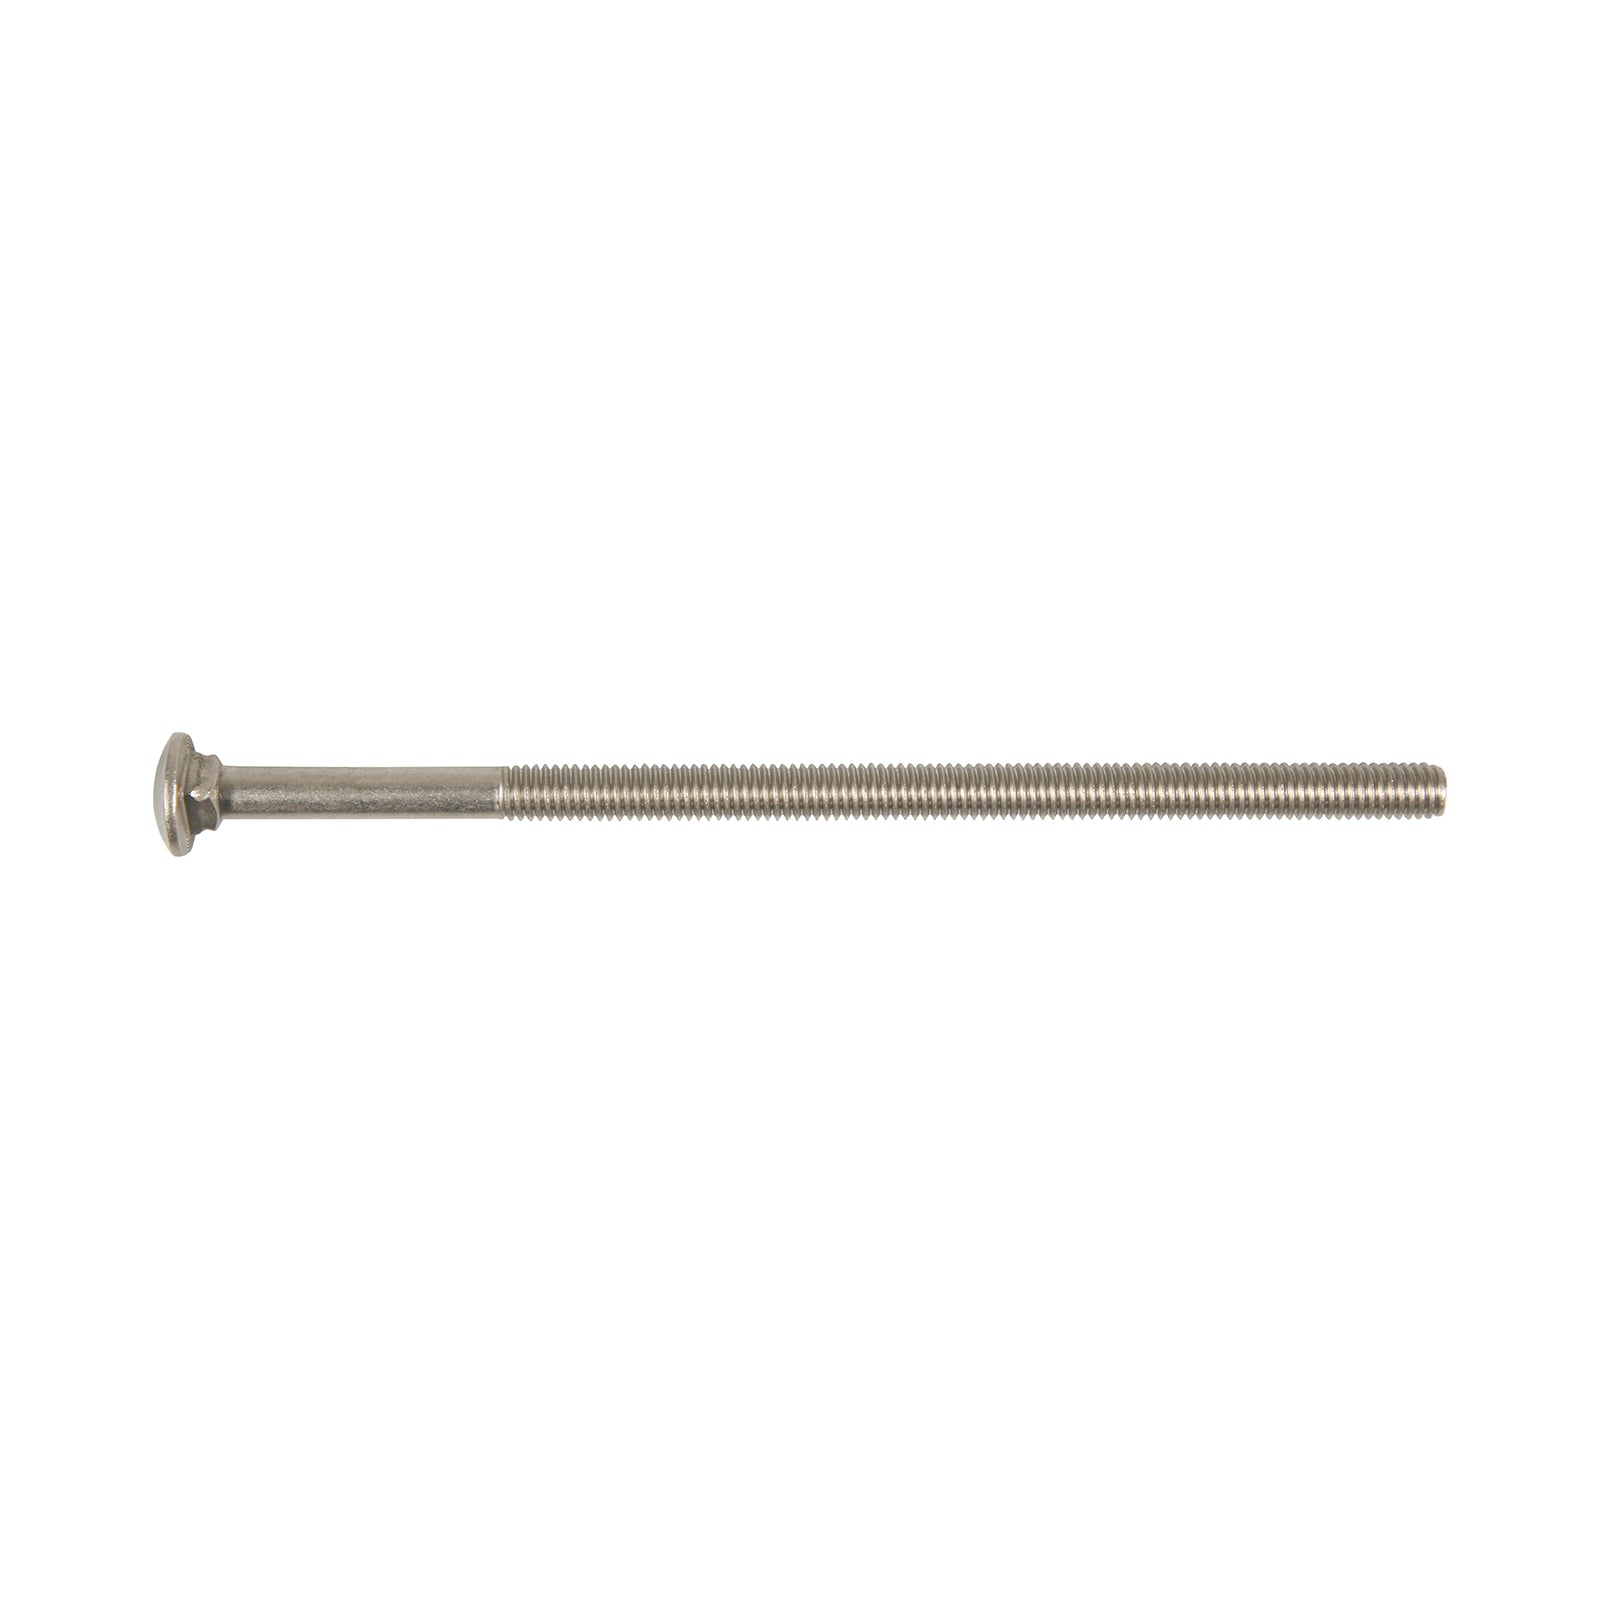 3/8"-16 x 8" Conquest Carriage Bolt - 316 Stainless Steel